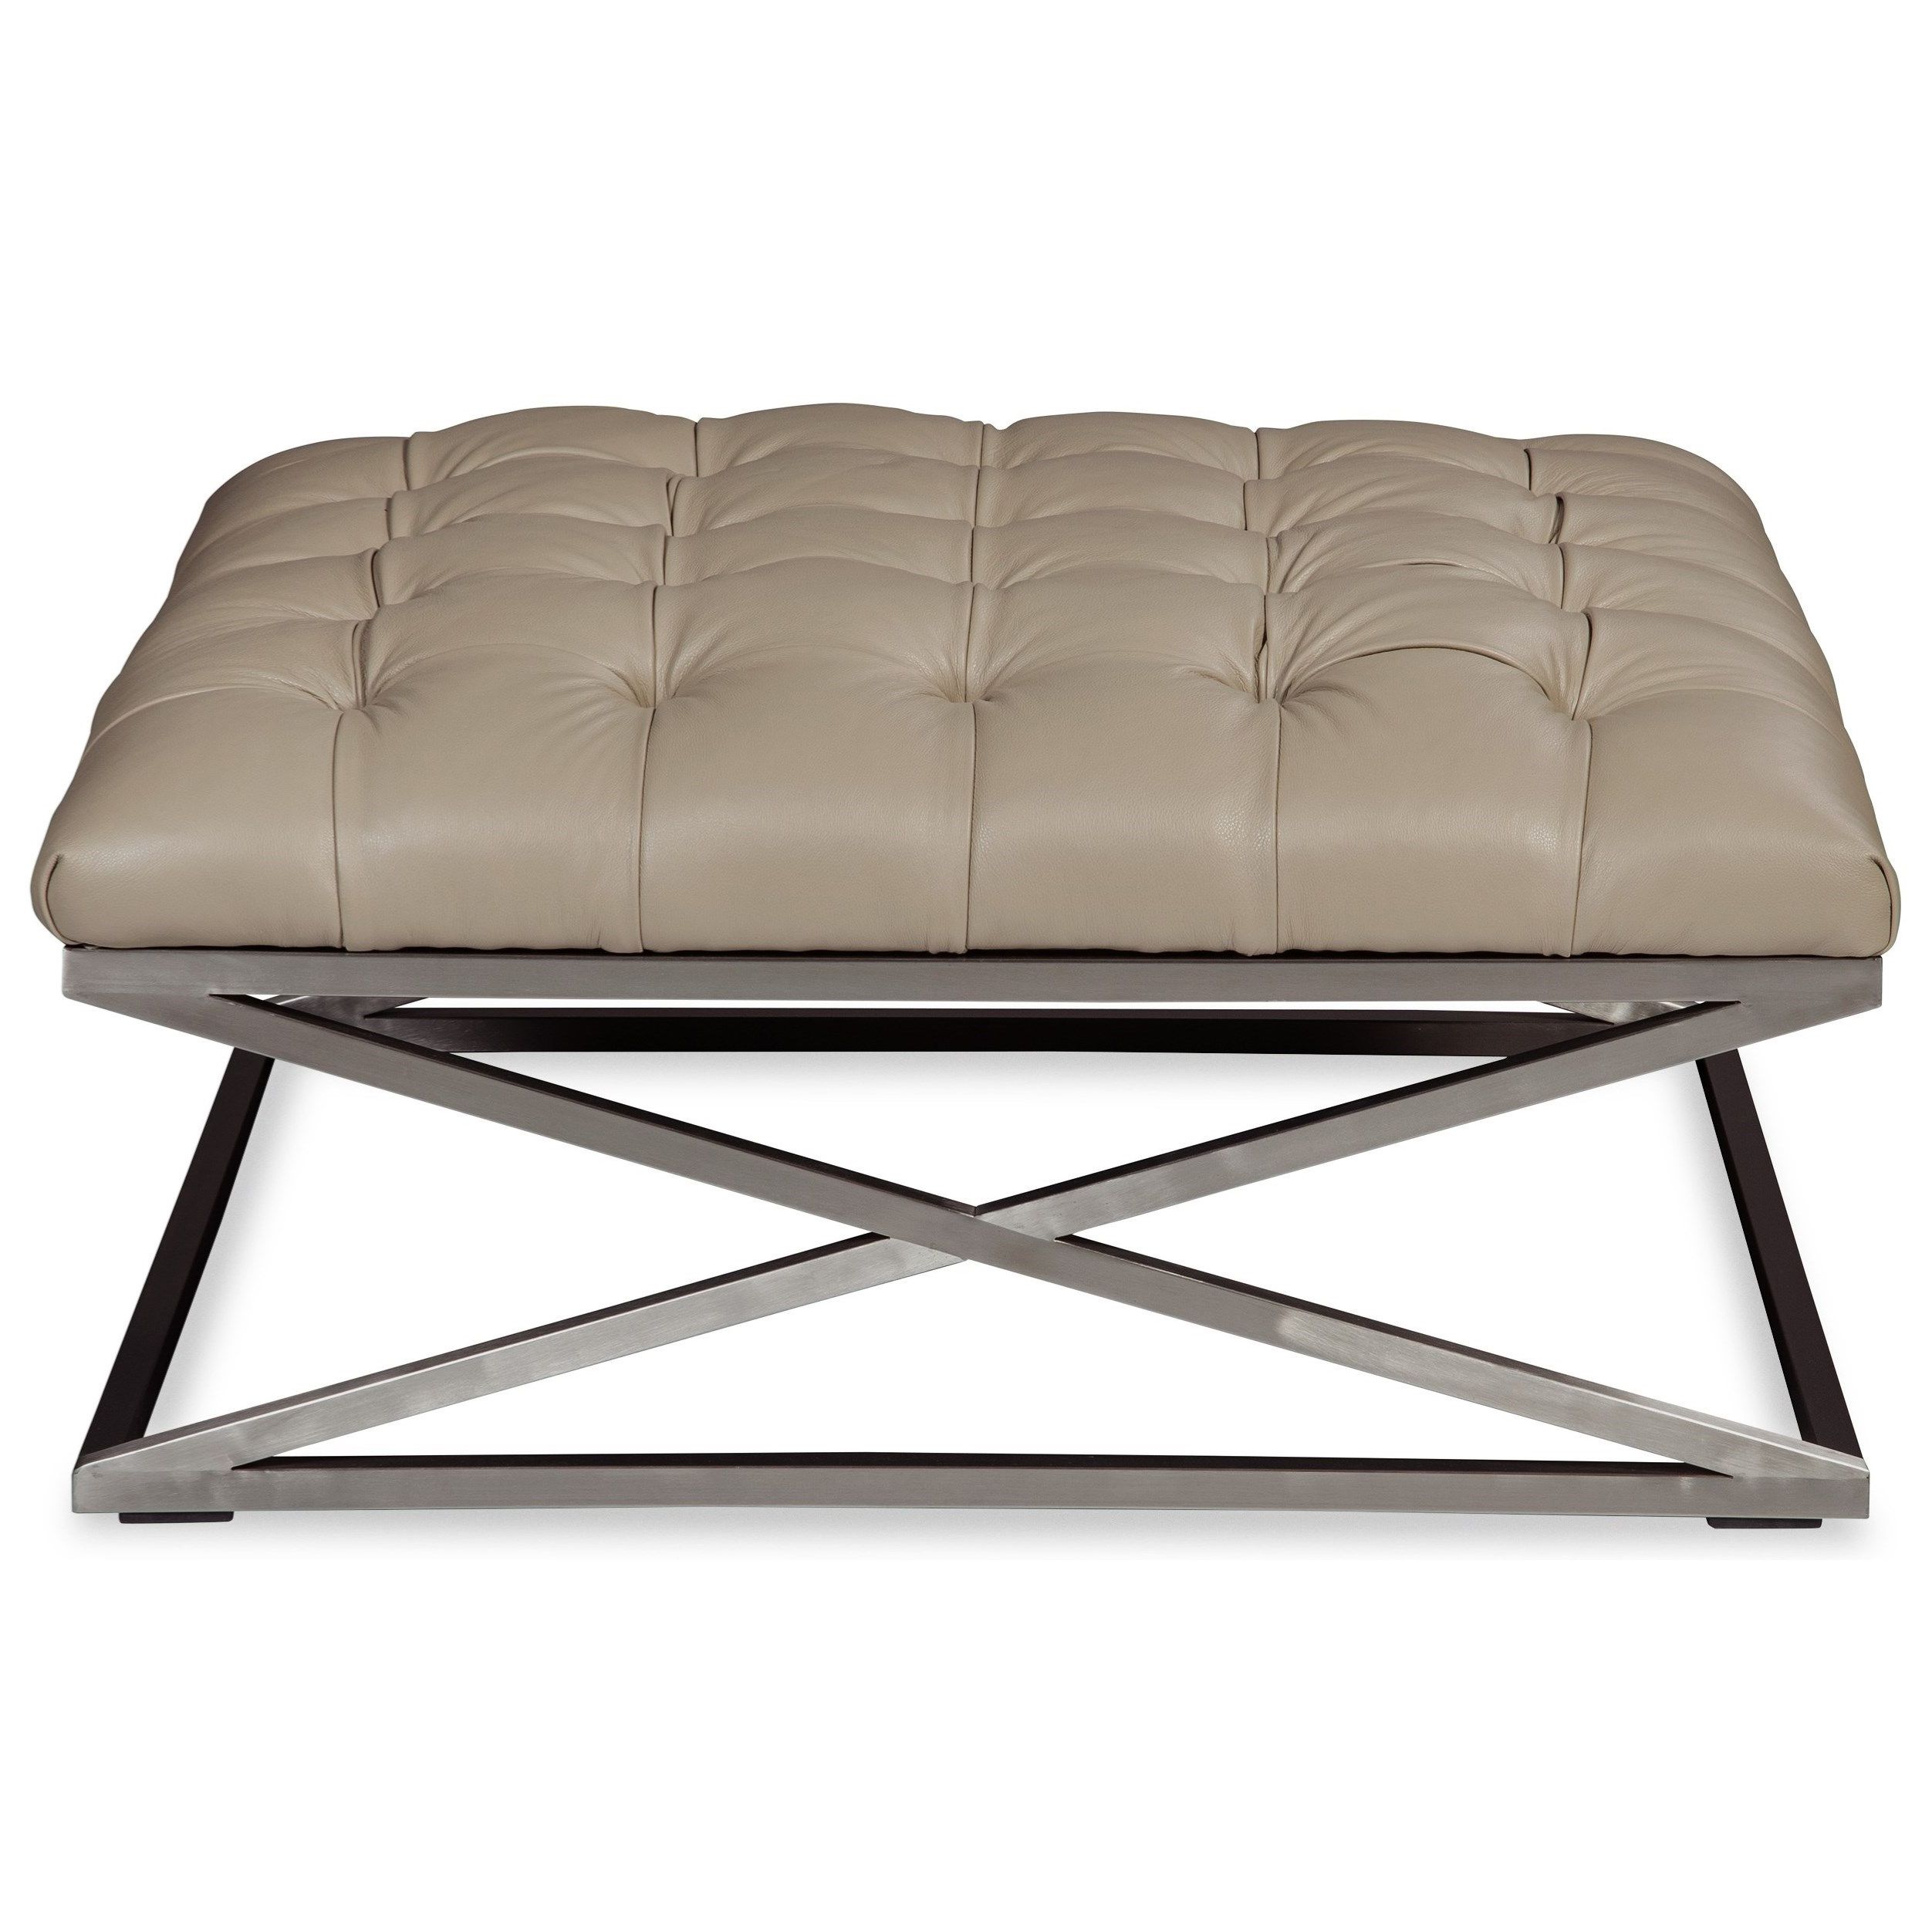 Craftmaster L088100 Contemporary Square Metal Cocktail Ottoman In Most Current Bronze Steel Tufted Square Ottomans (View 1 of 10)